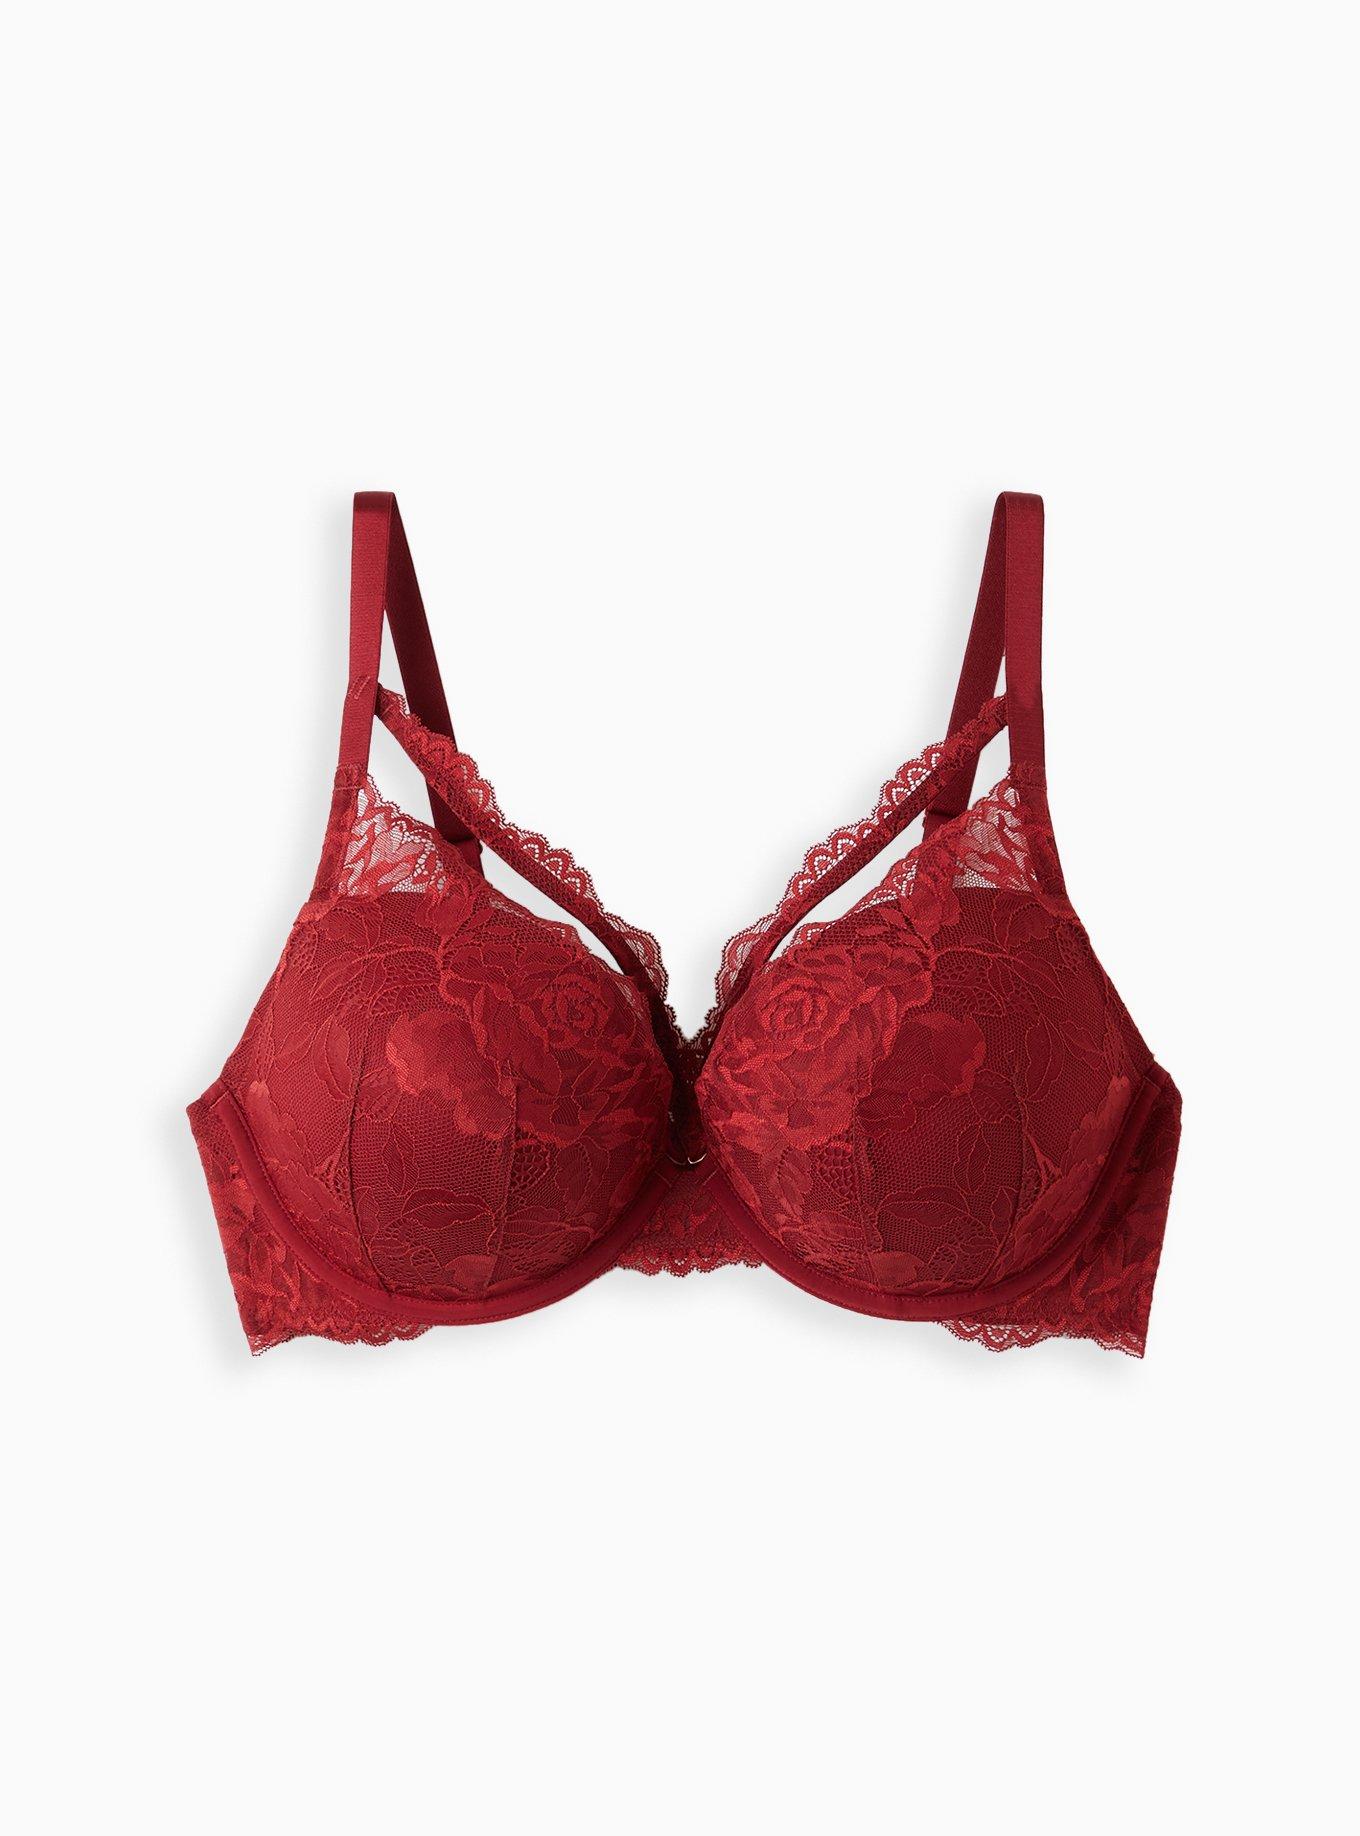 Torrid Women's Push-Up Plunge Strappy V Bra Size: 44D, Lace Red(58)